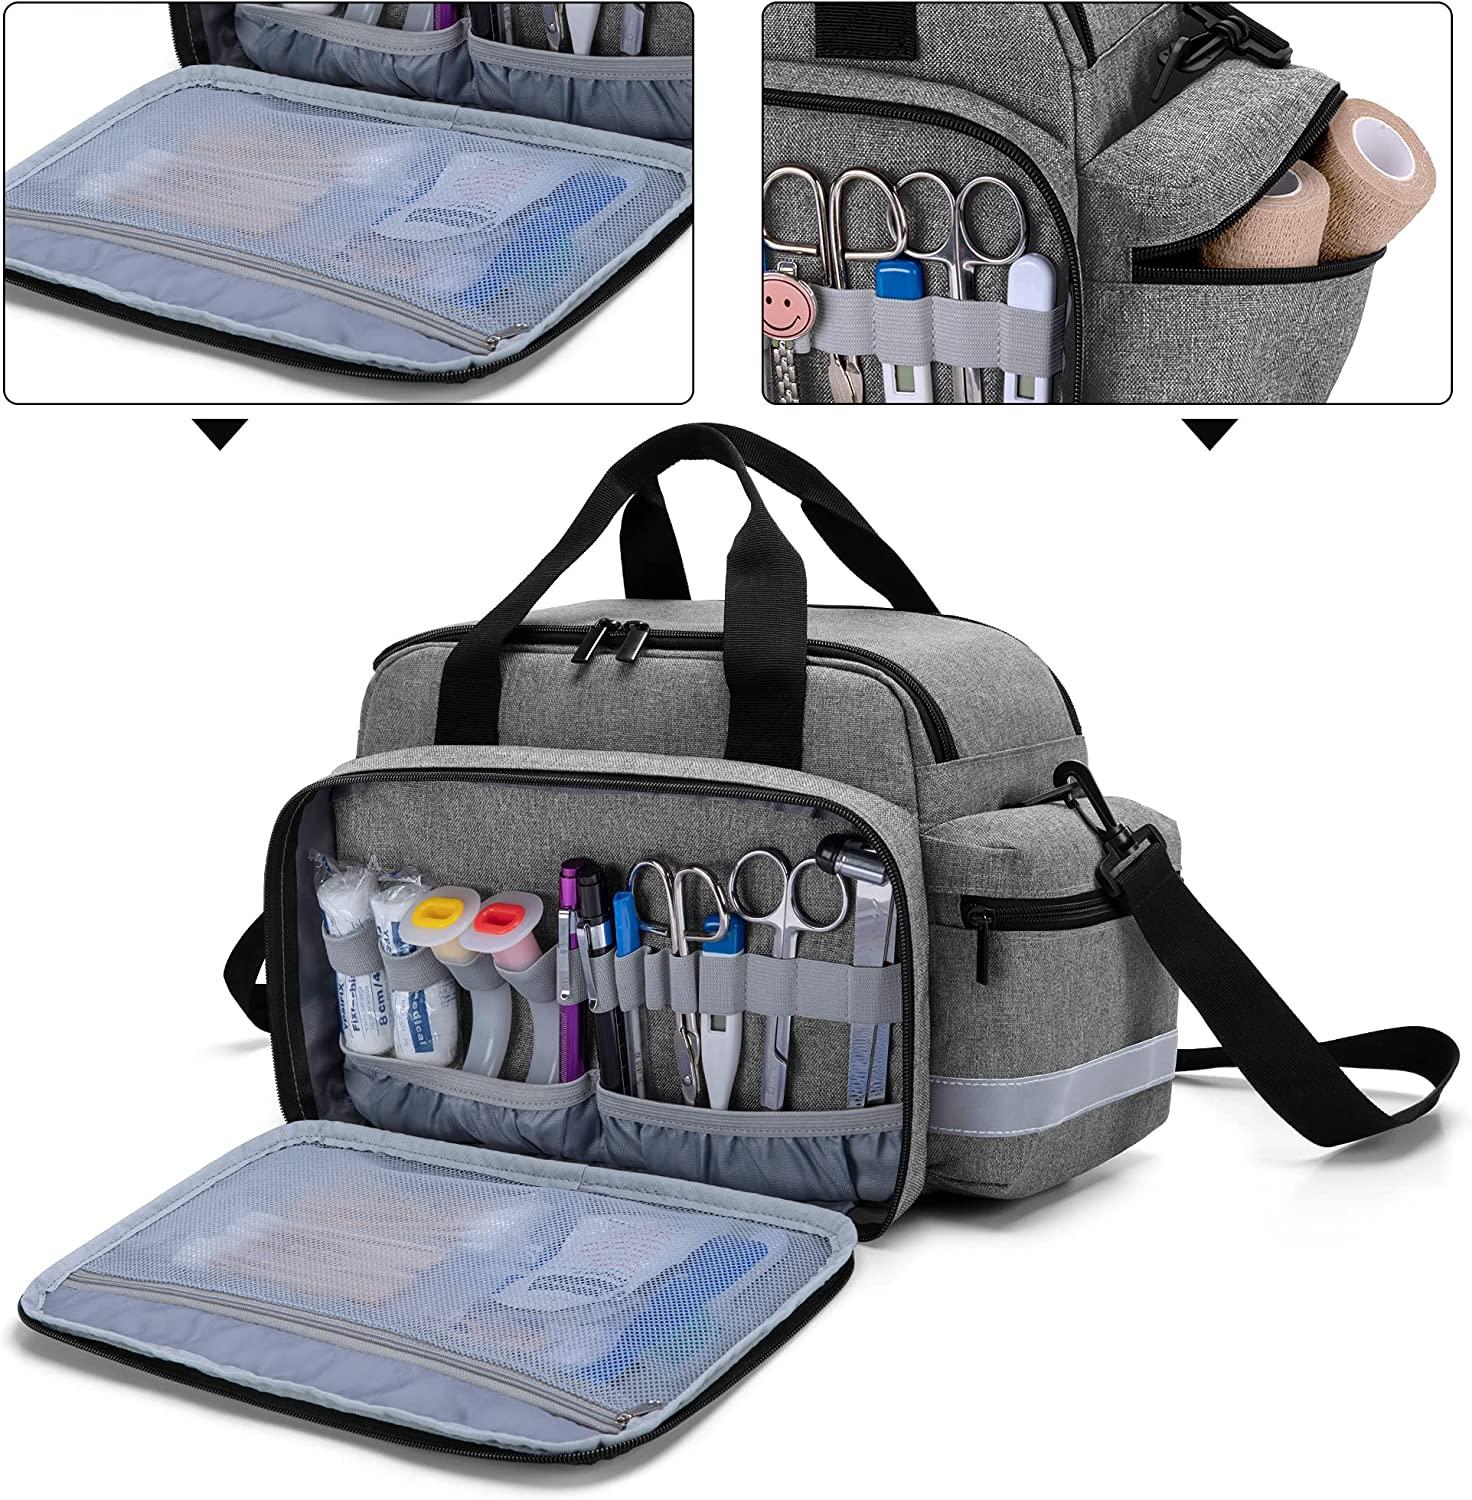 USA Gear Medical Equipment Supplies Bag for Doctors, Pharmaceutical Reps, Nurses and Vet Techs Padded Shoulder Strap & Adjustable Storage Compartments